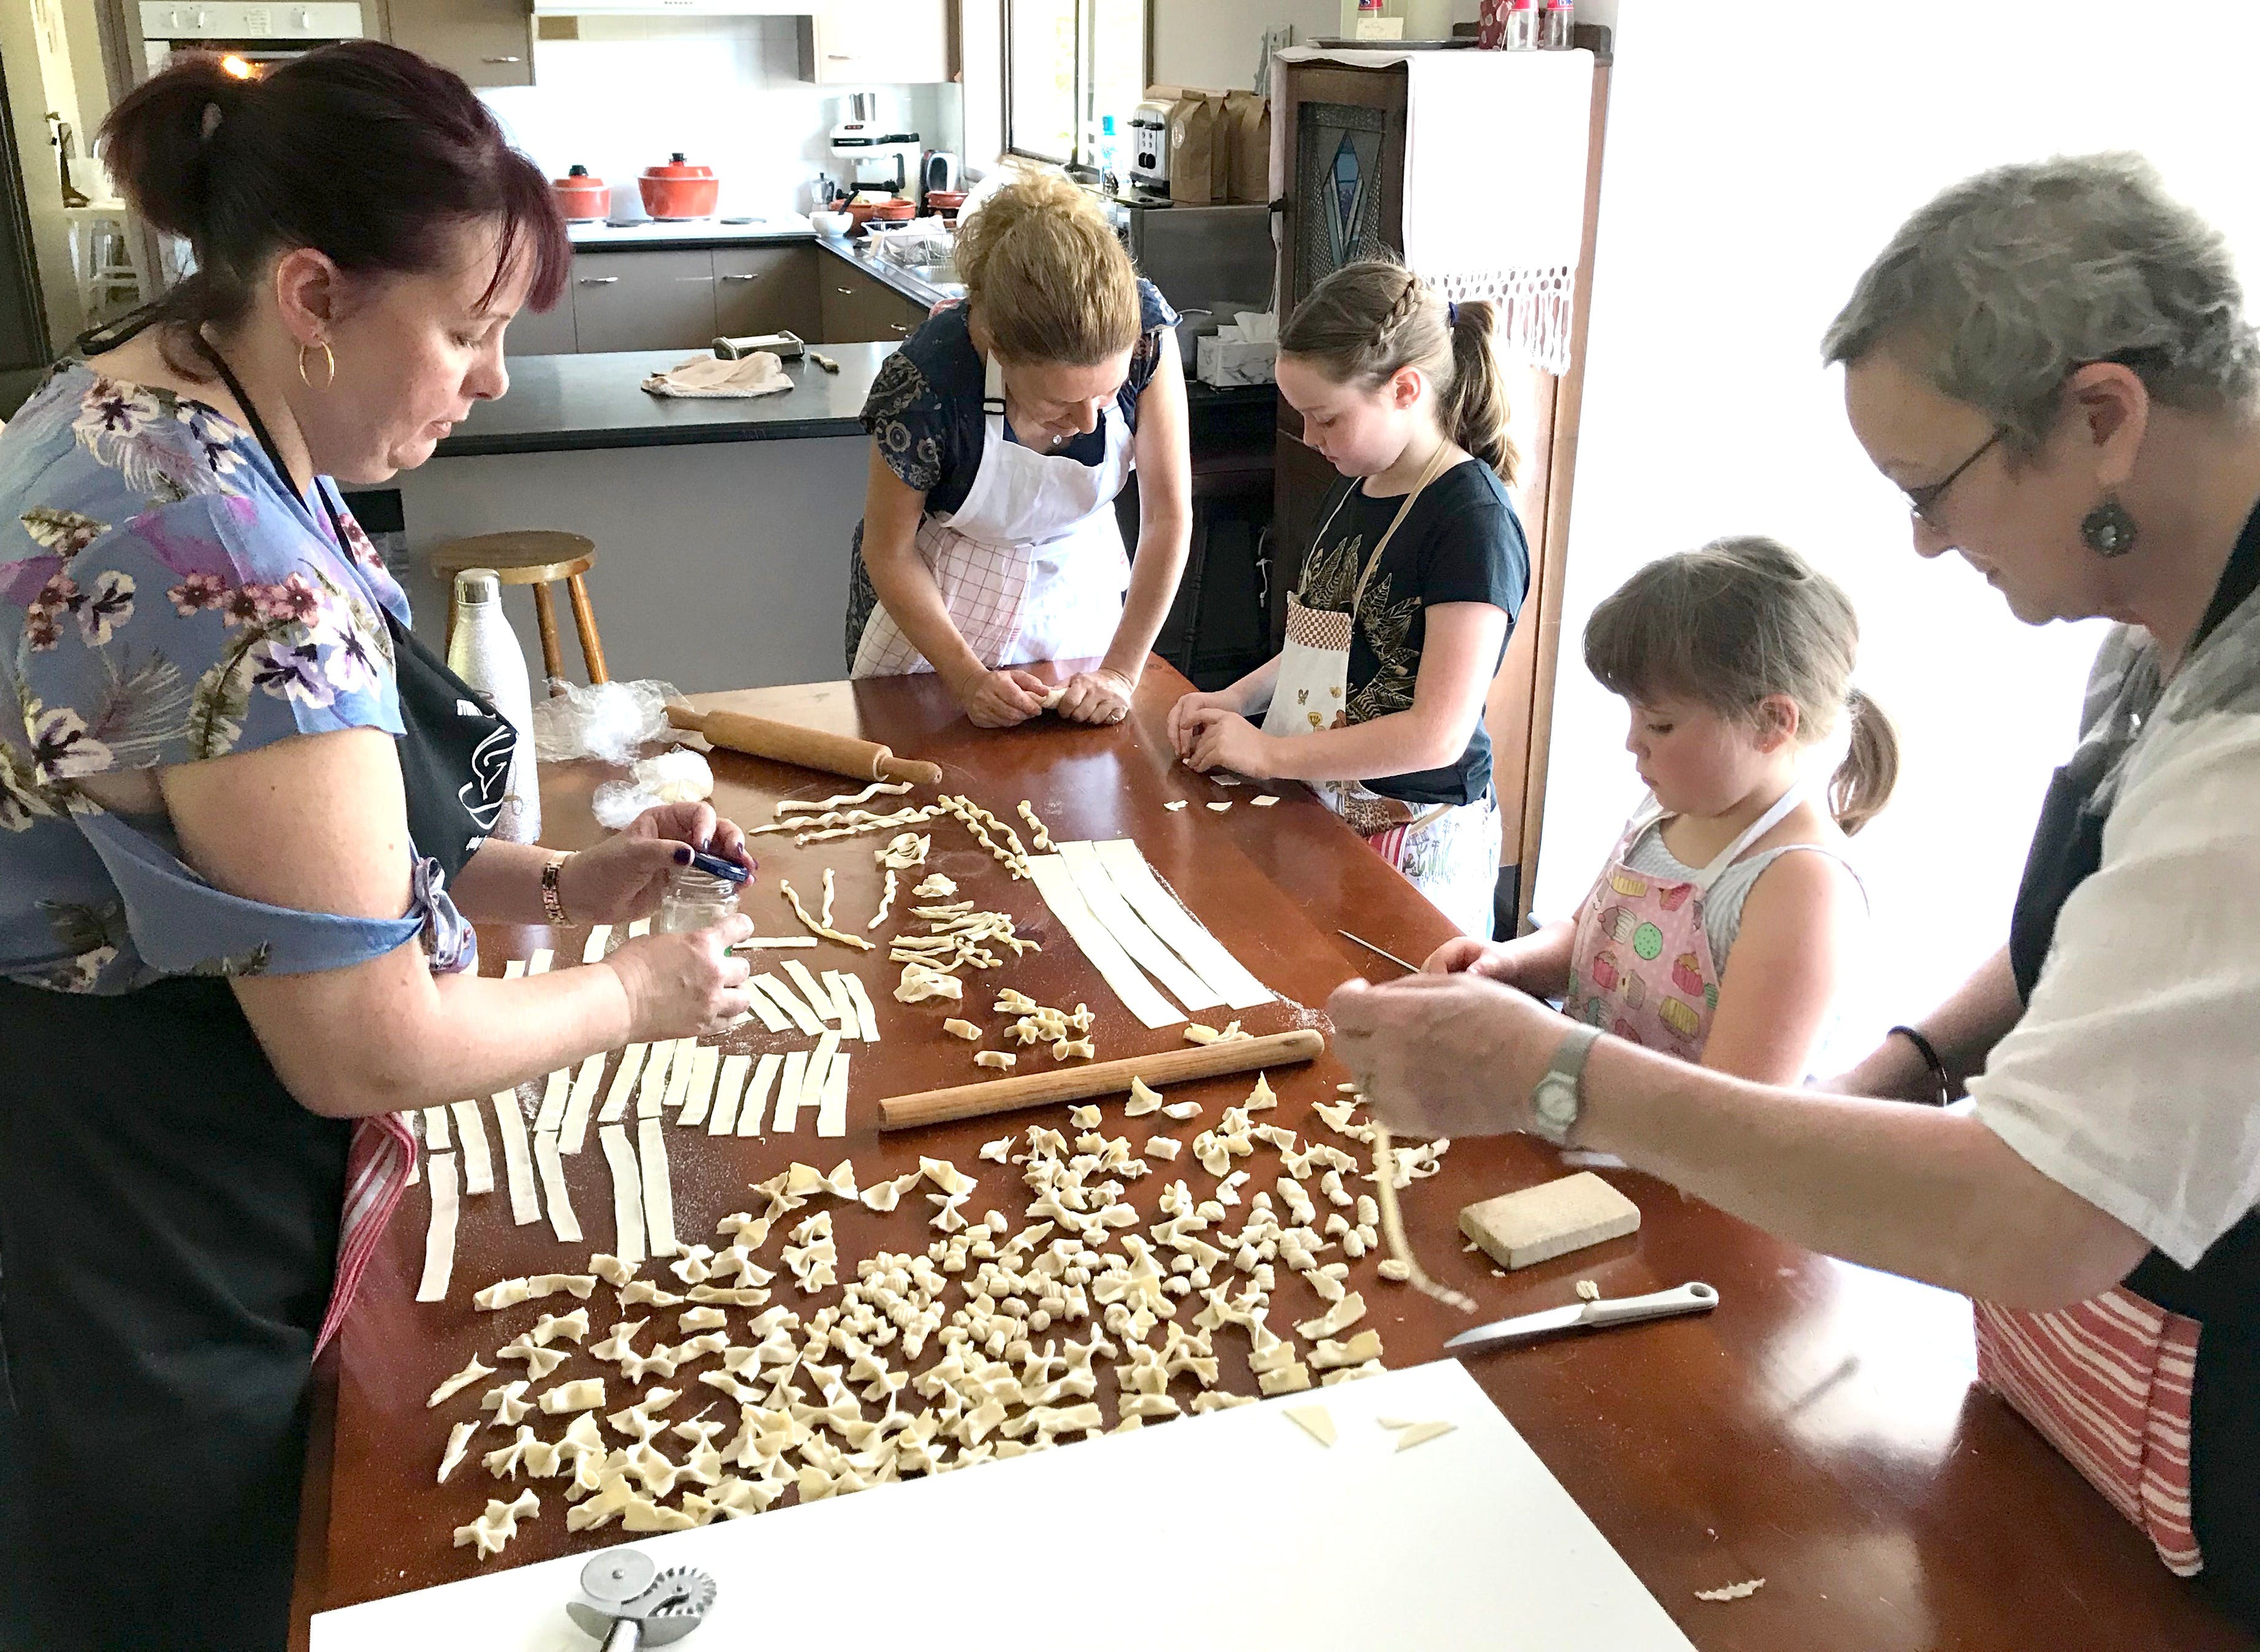 Kids Pasta Making Class - hands on fun at your house - Accommodation Mt Buller